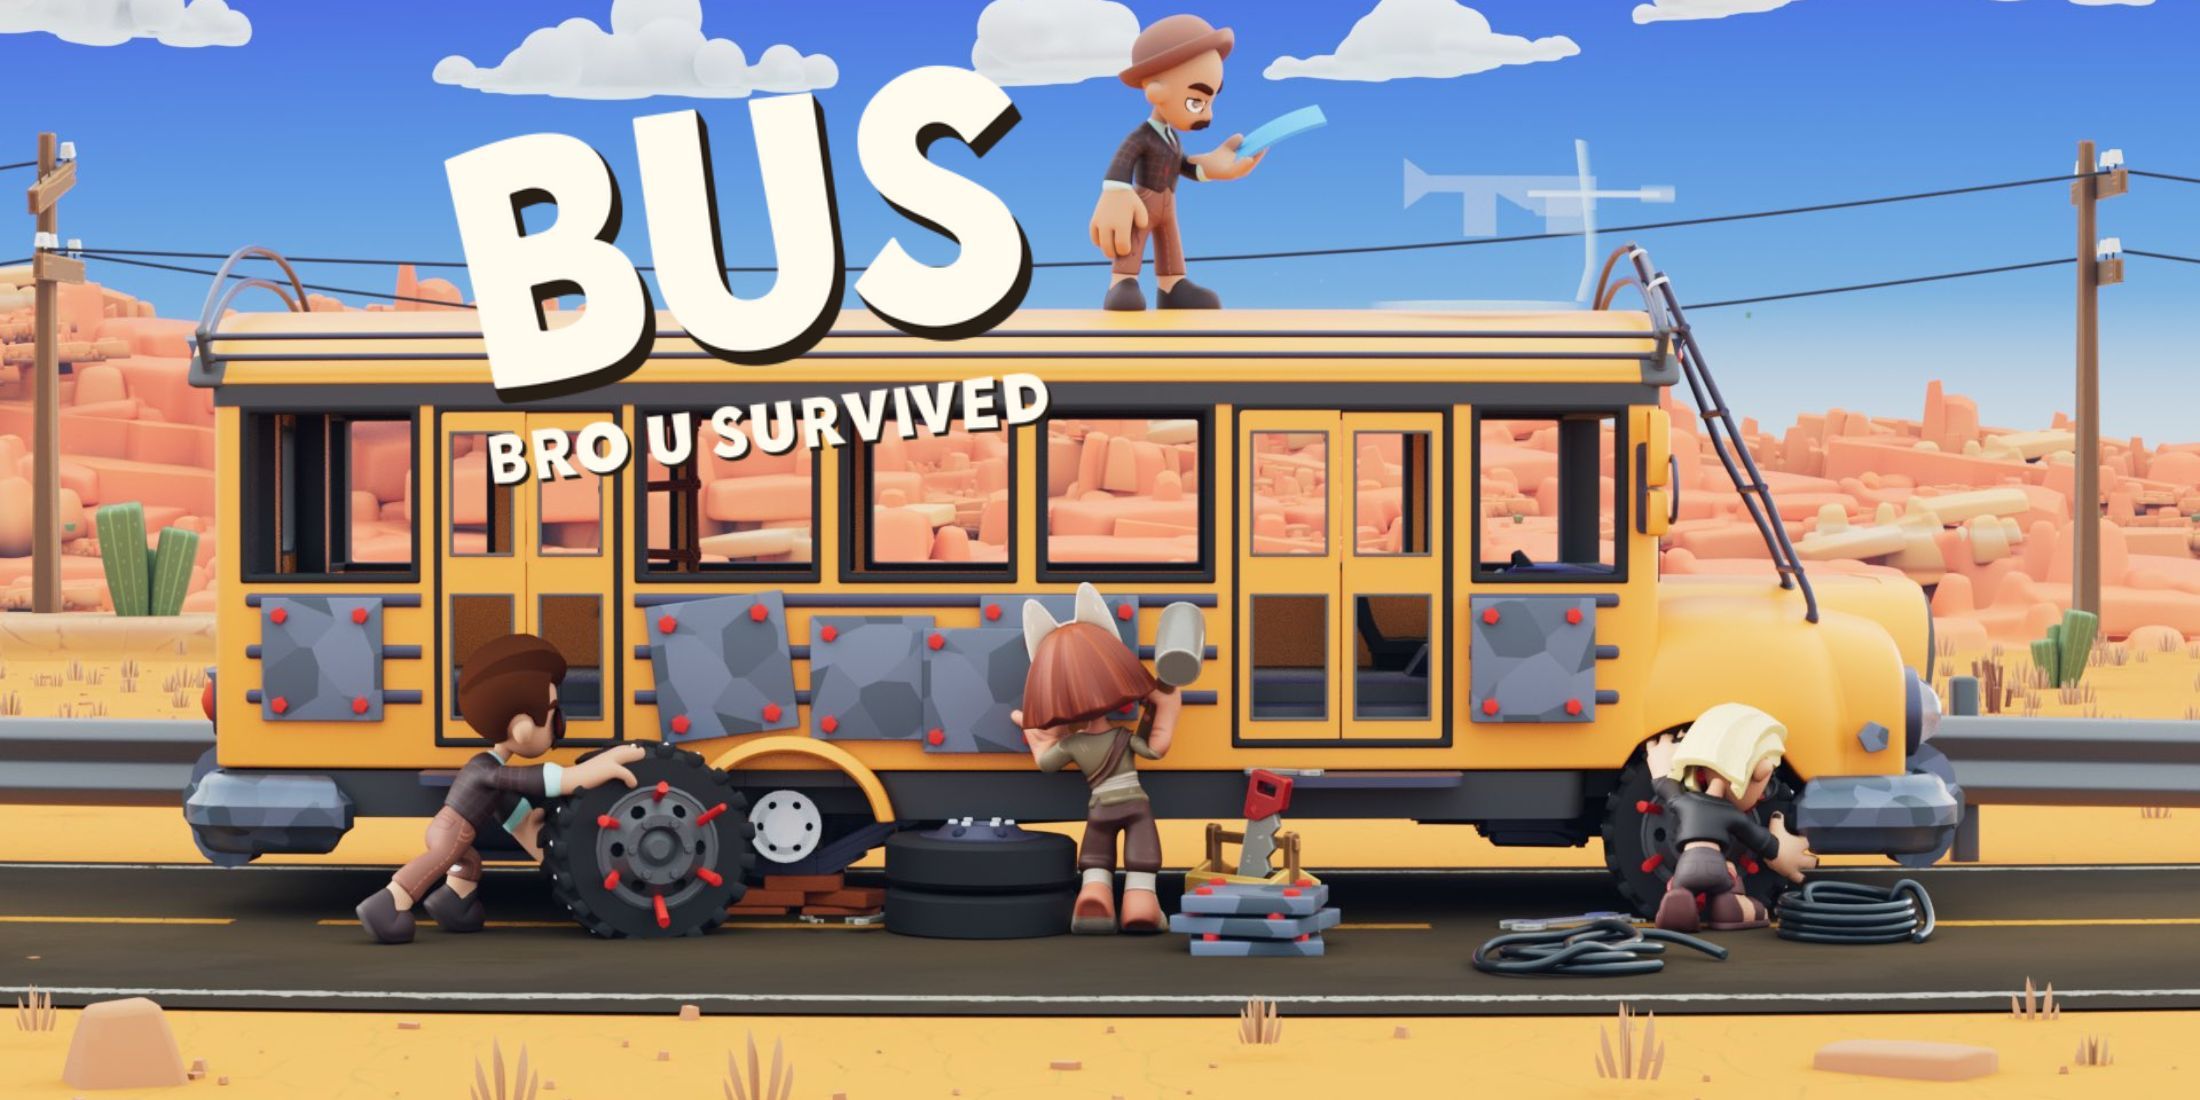 Bus Bro u Survived Founder Discusses Bus Customization And Base Building Mechanics